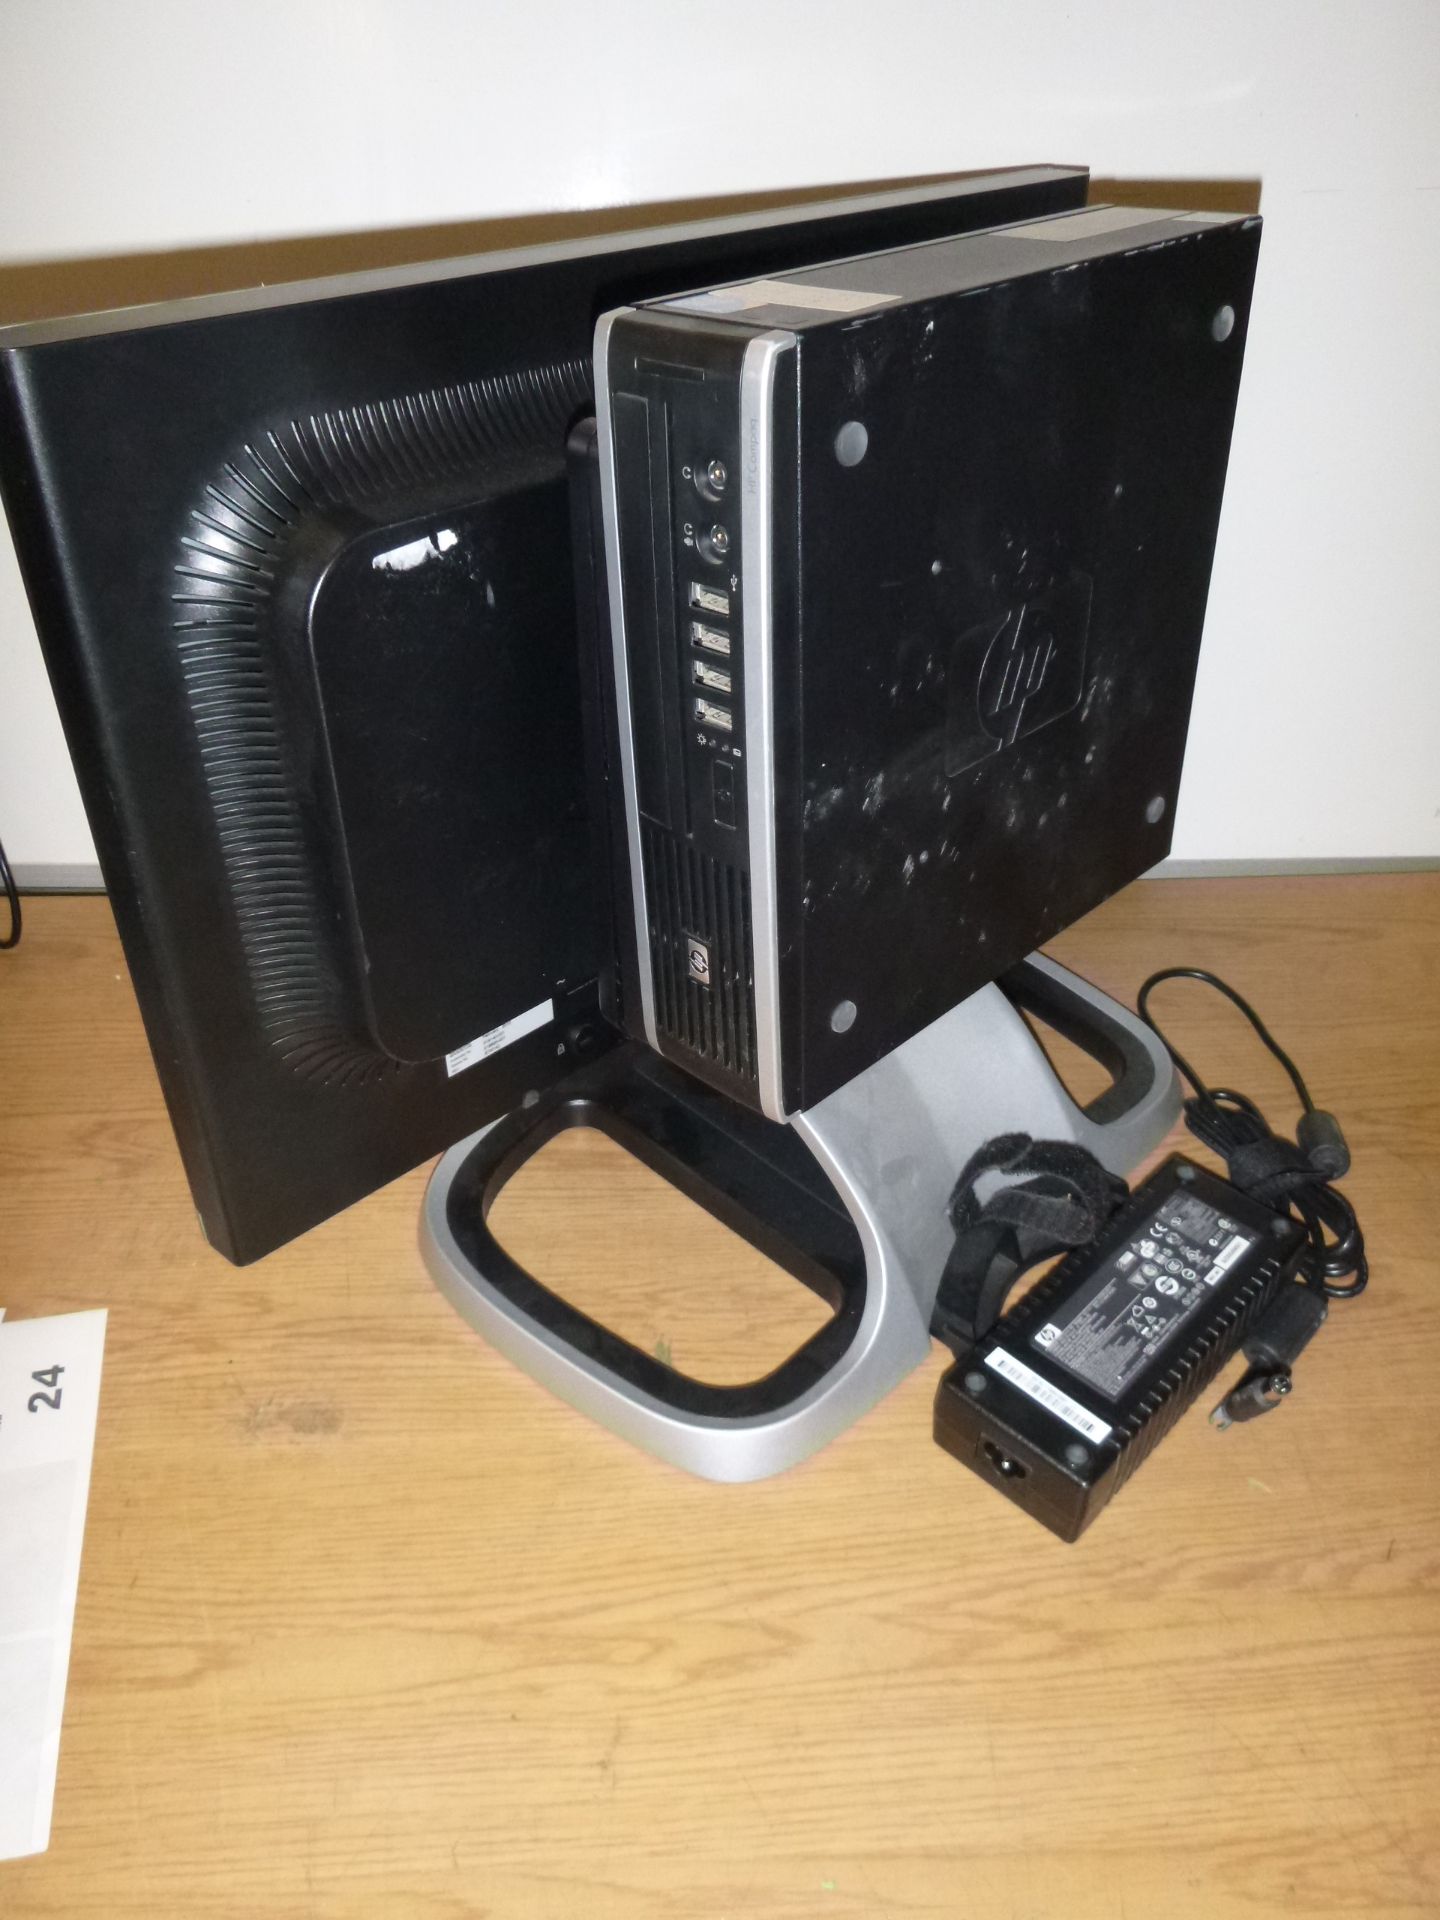 HP/COMPAQ 8000 ELITE ULTRA SMALL DESKTOP TOWER WITH 22" TFT SCREEN. C2D 2.93GHZ PROCESSOR, 4GB - Image 2 of 3